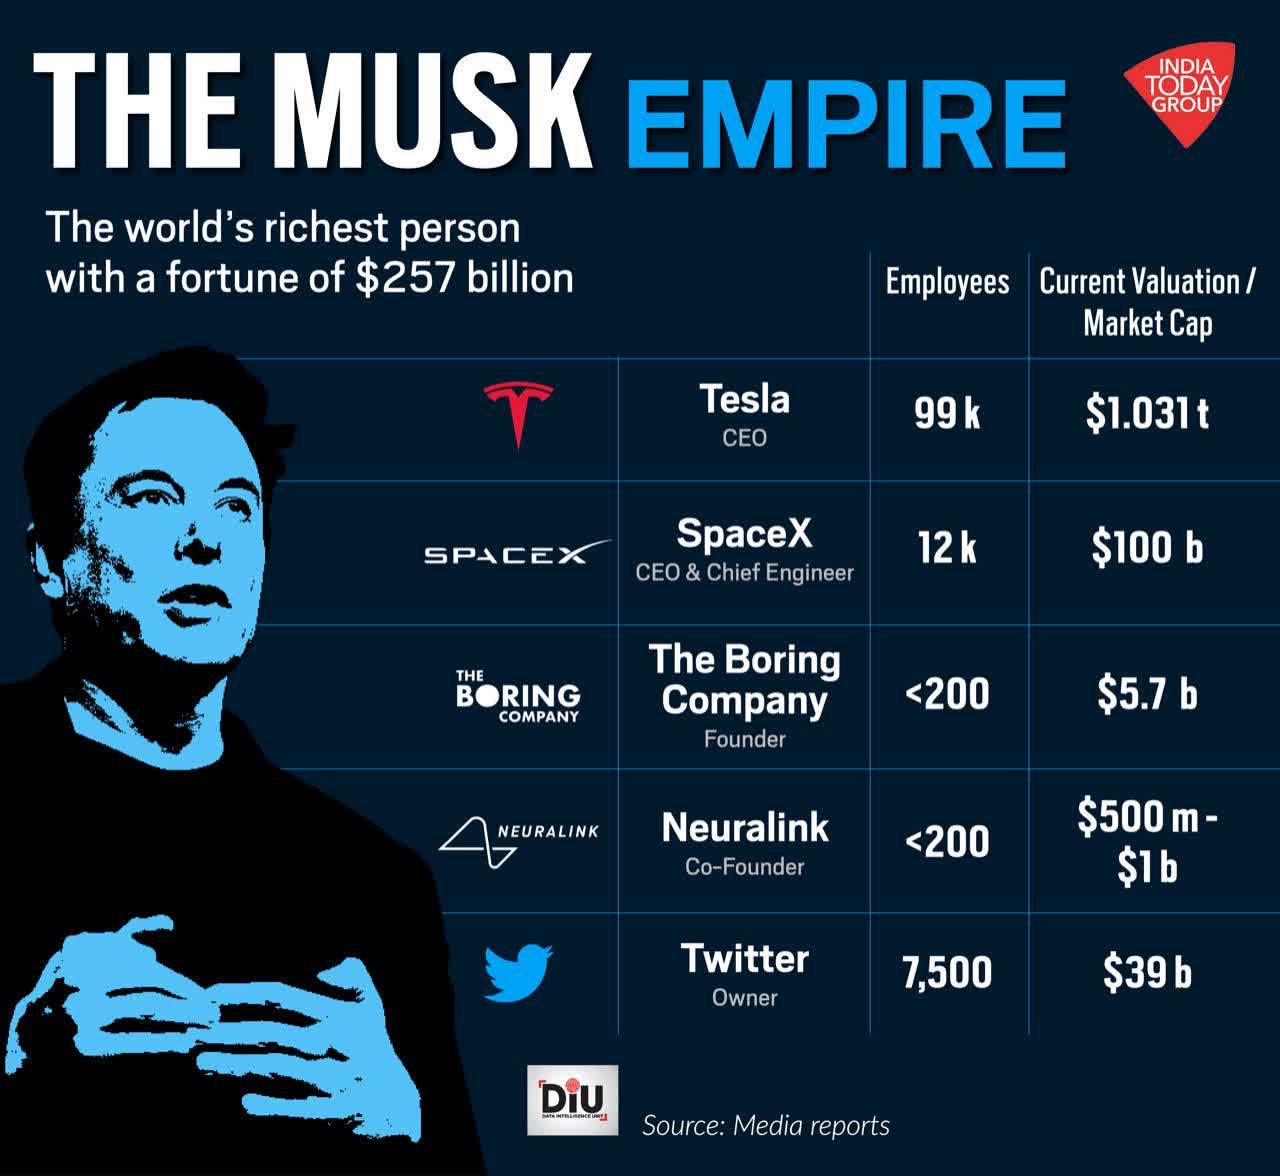 Elon Musk's empire, Musk is the world's richest person